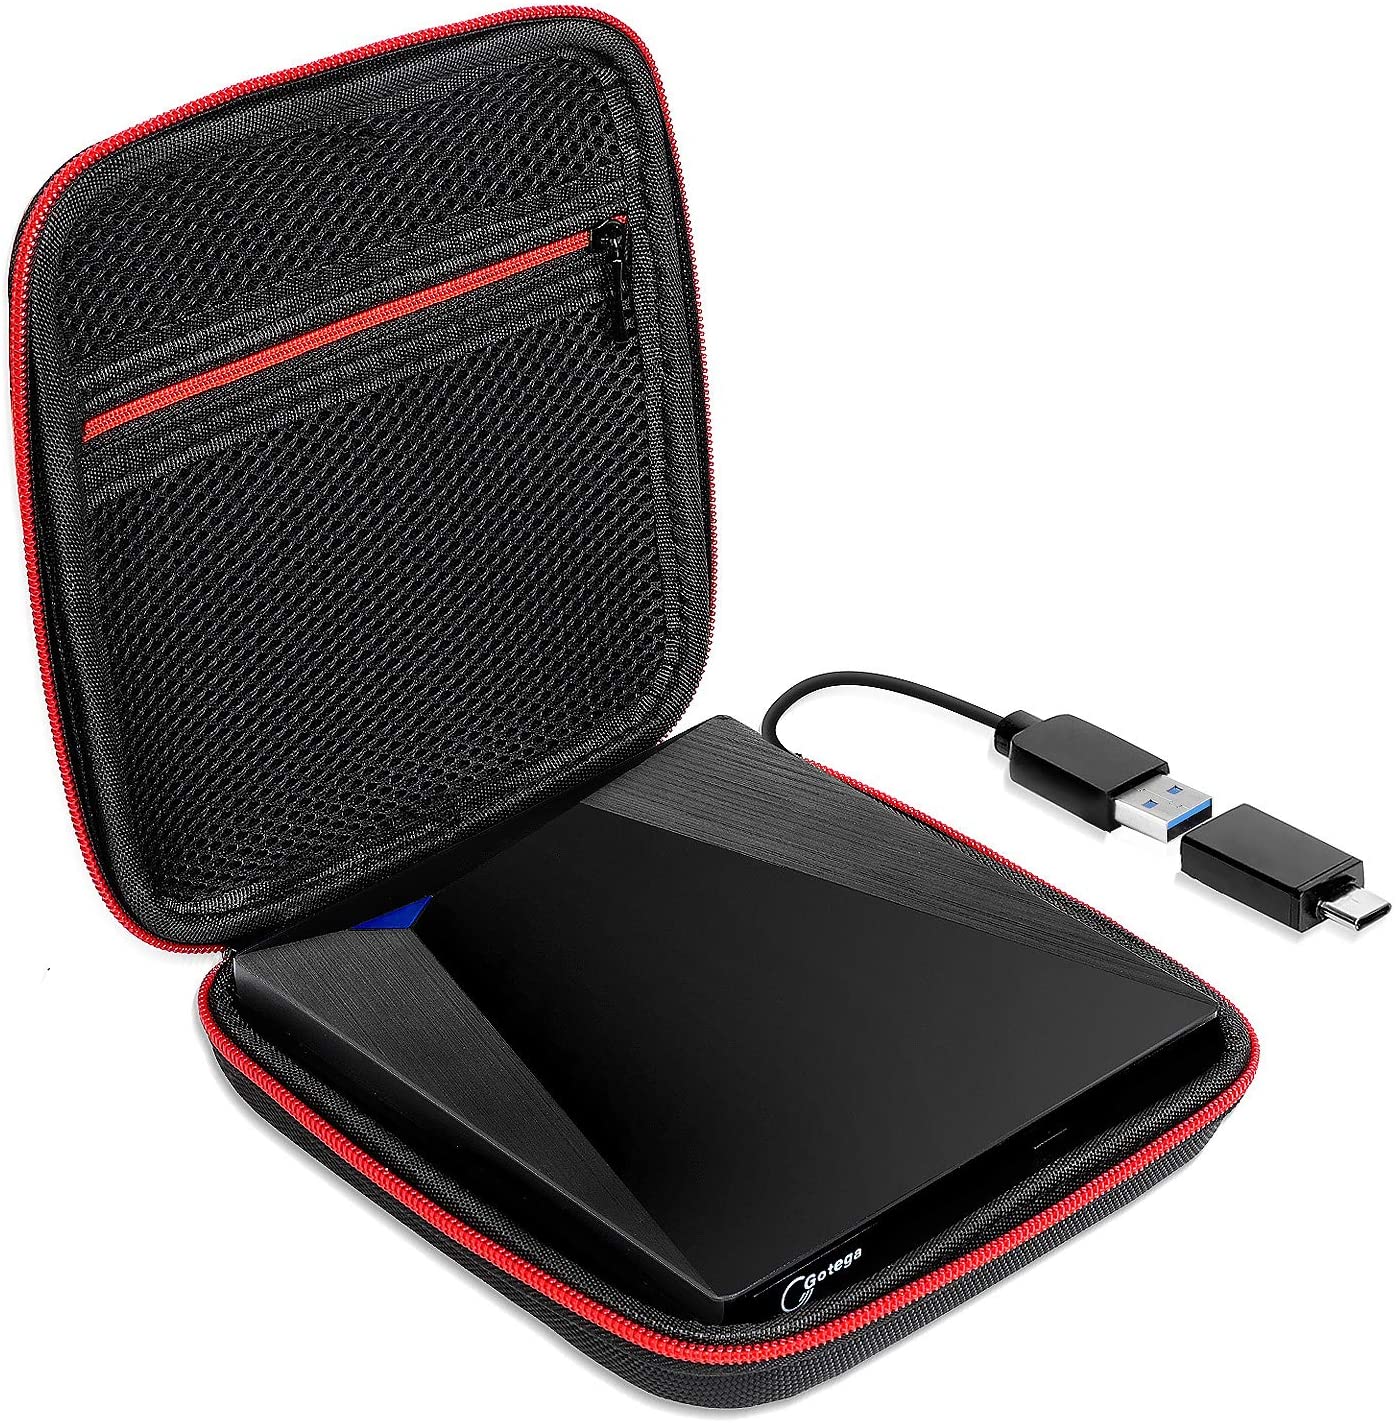 Gotega-External-CD-Drive-USB-with-carrying-case